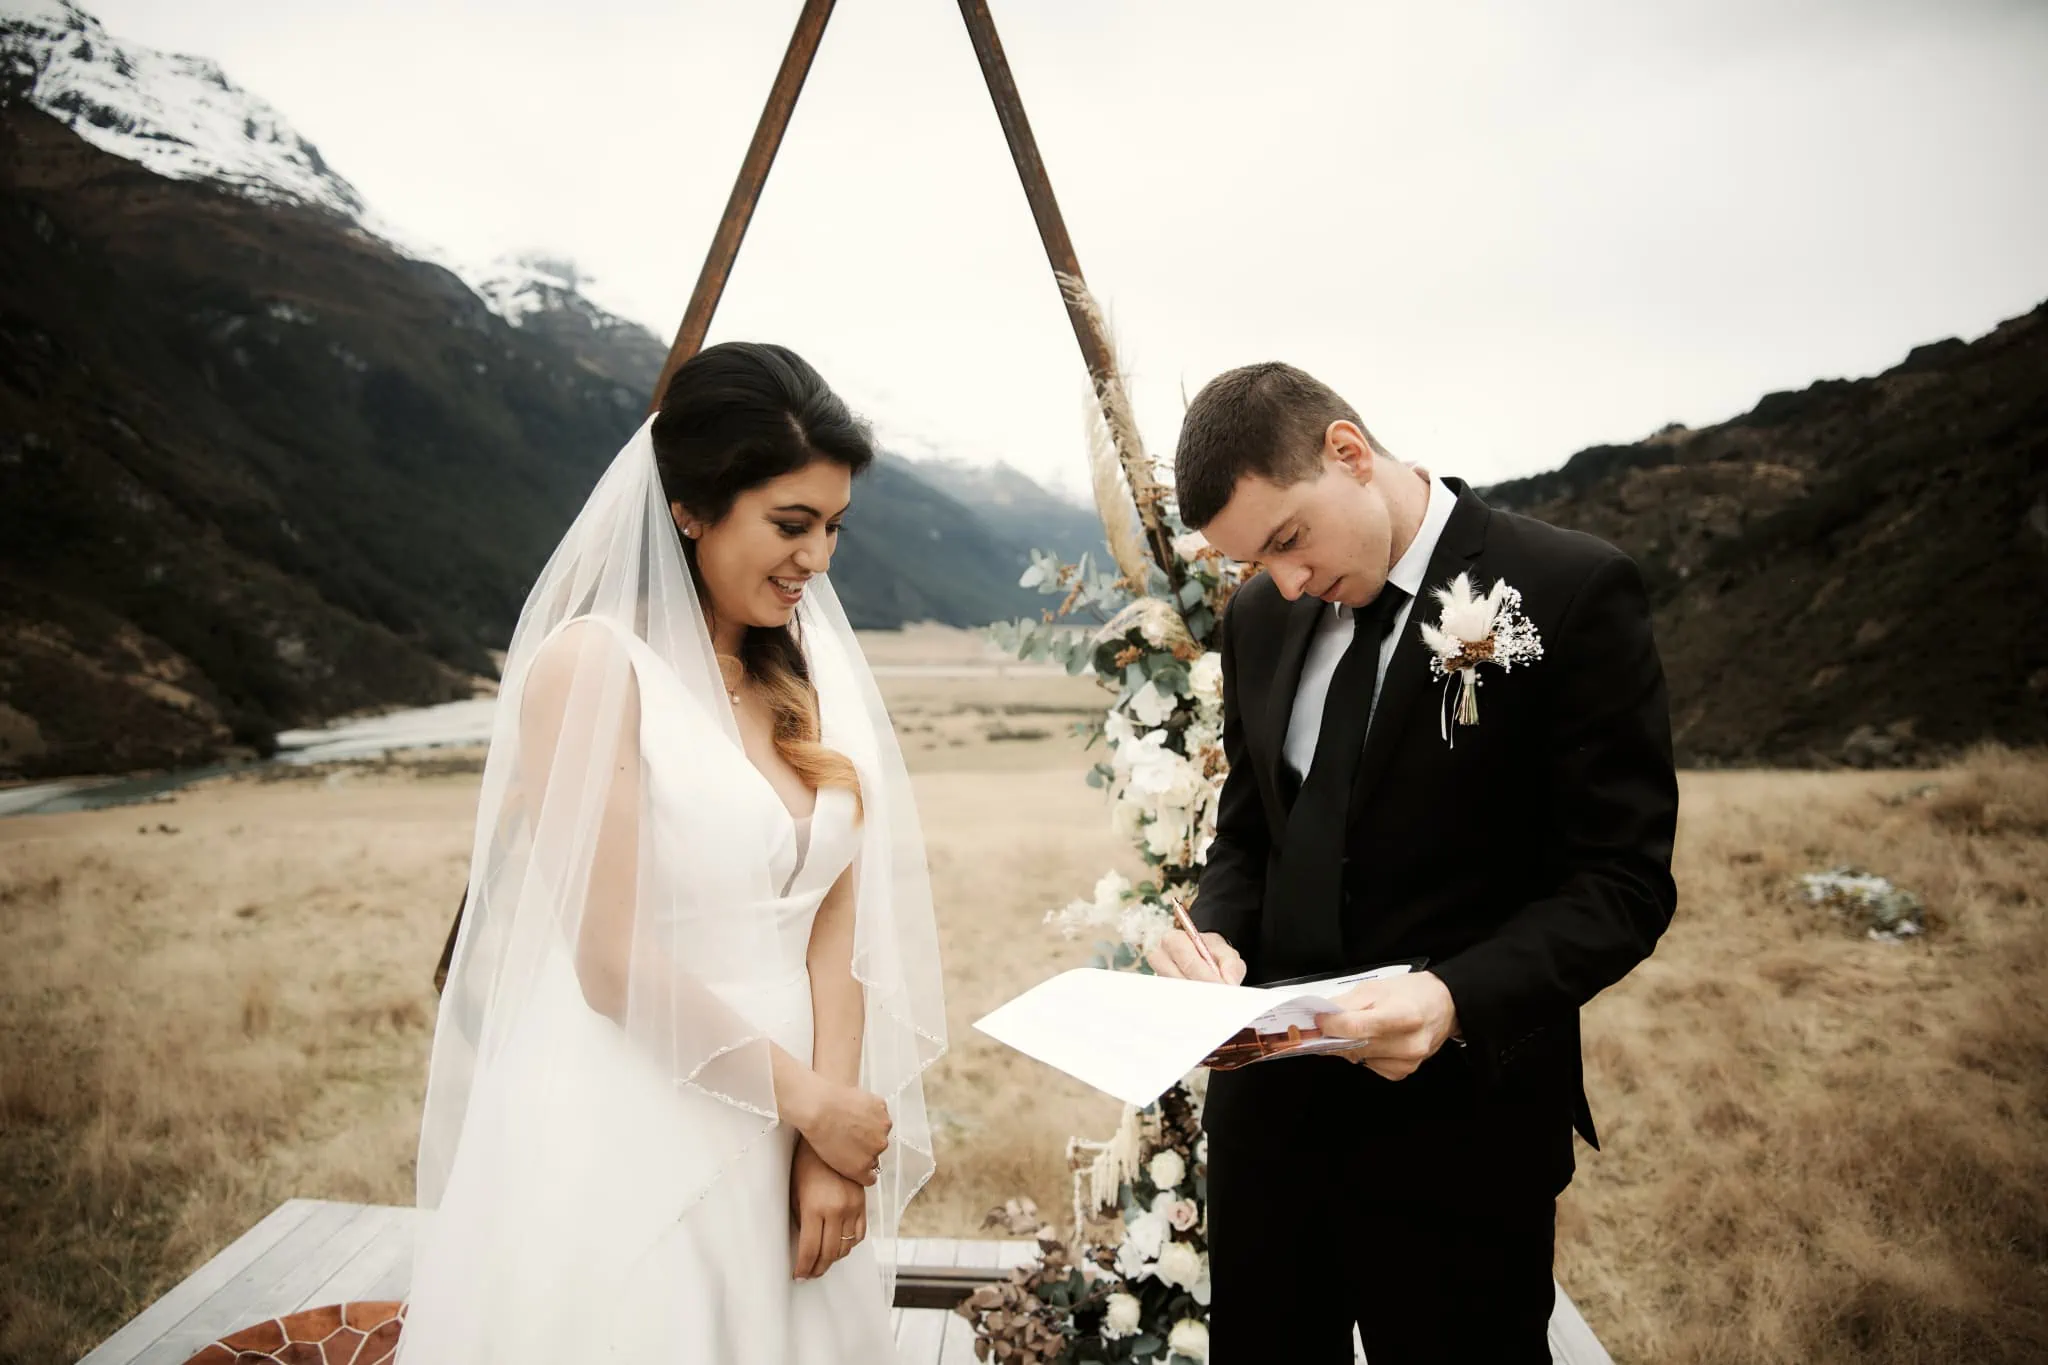 Michelle and Vedran celebrating their Rees Valley Station elopement wedding surrounded by mountains.